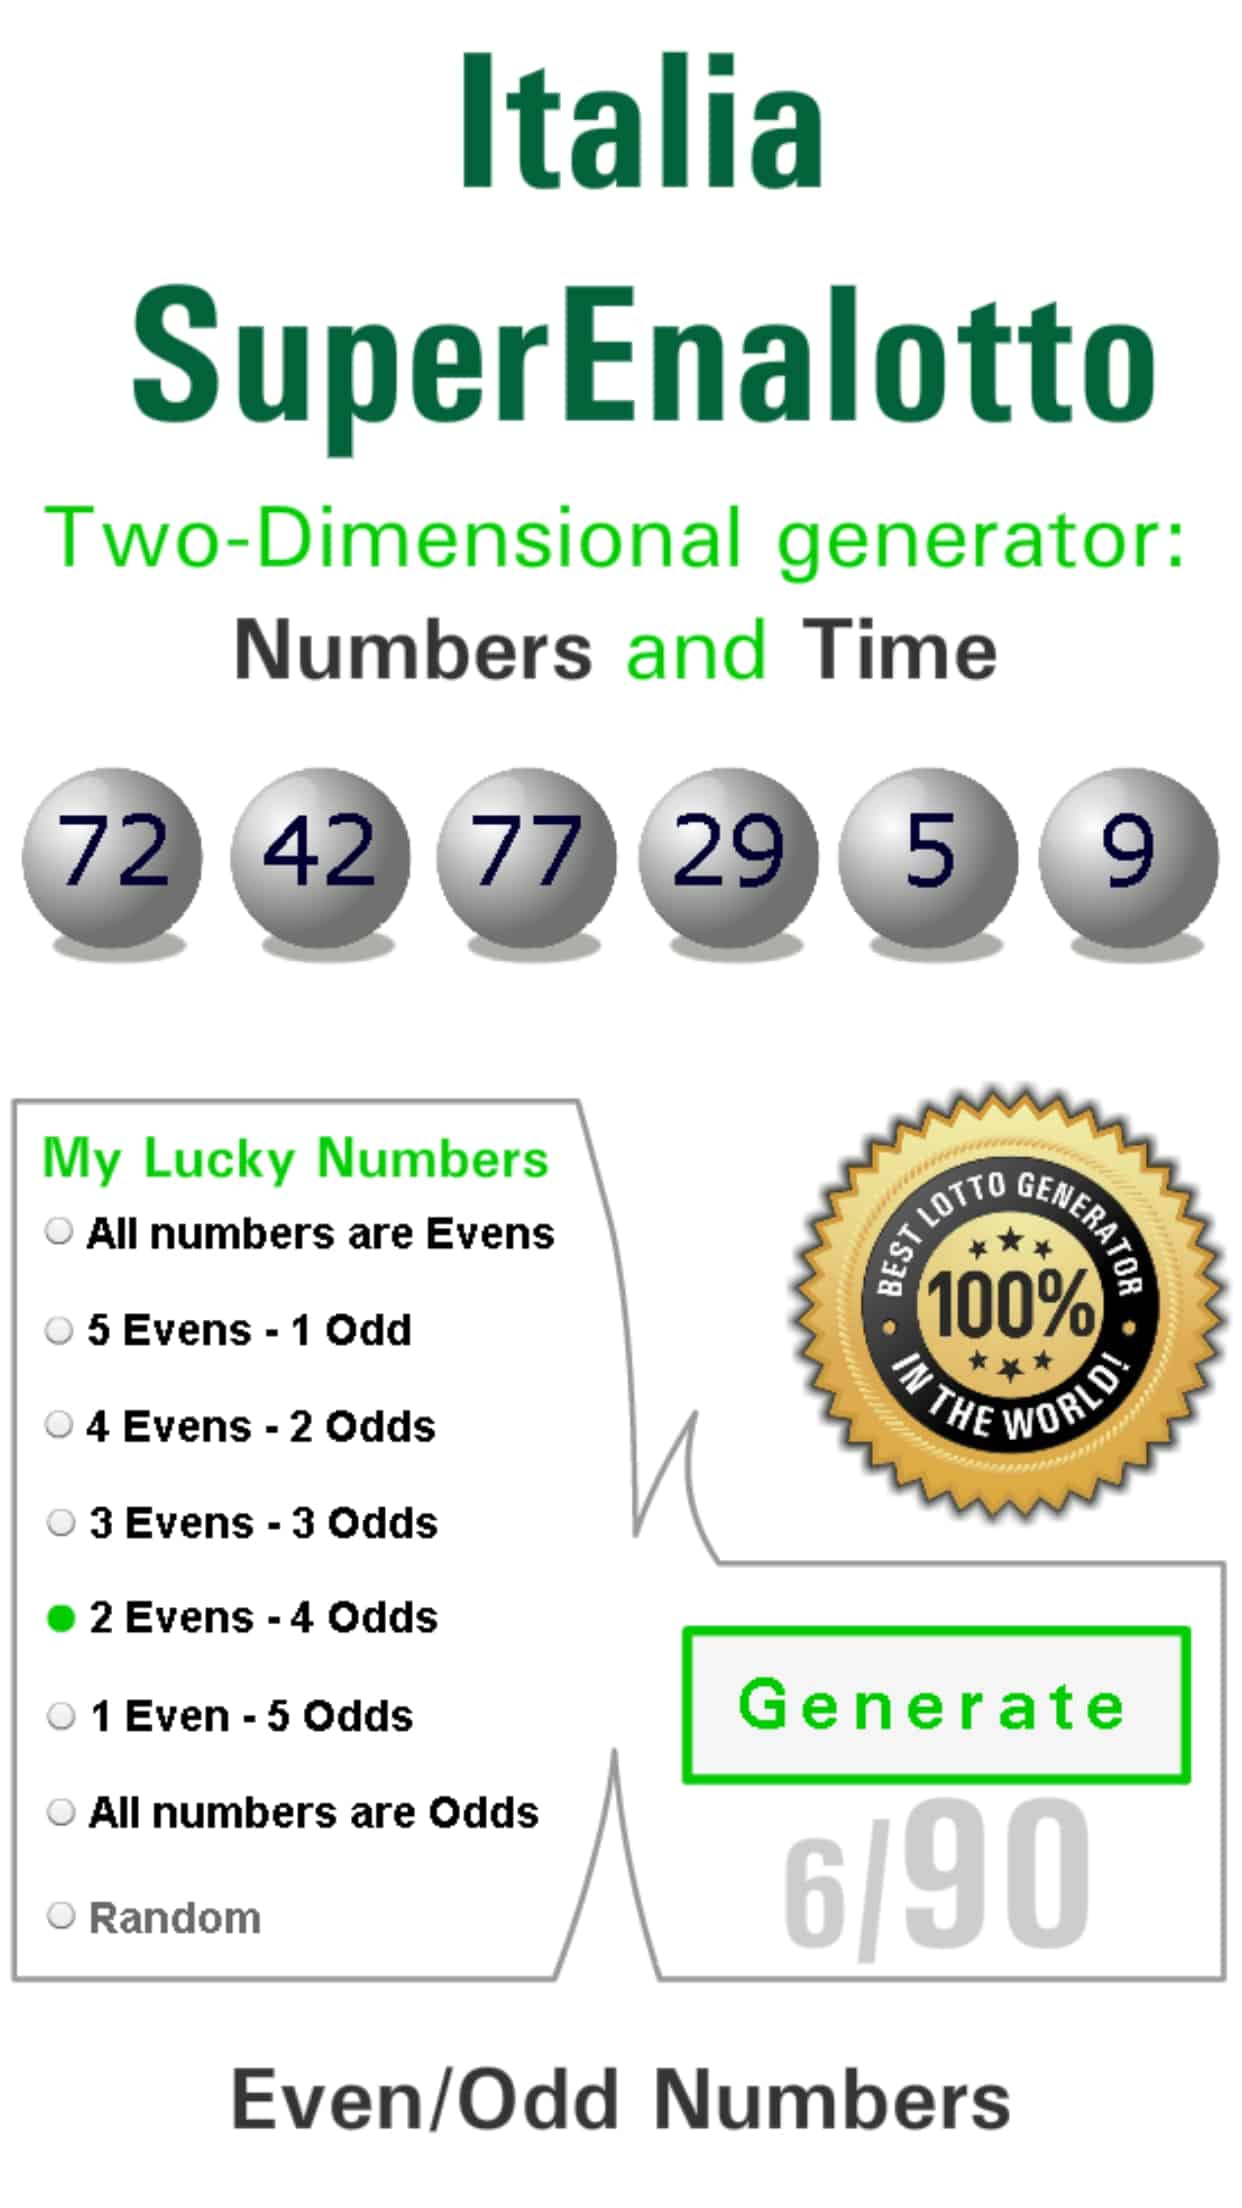 SuperEnaLotto | Italian Lotto | Results, Tips & Winning Numbers